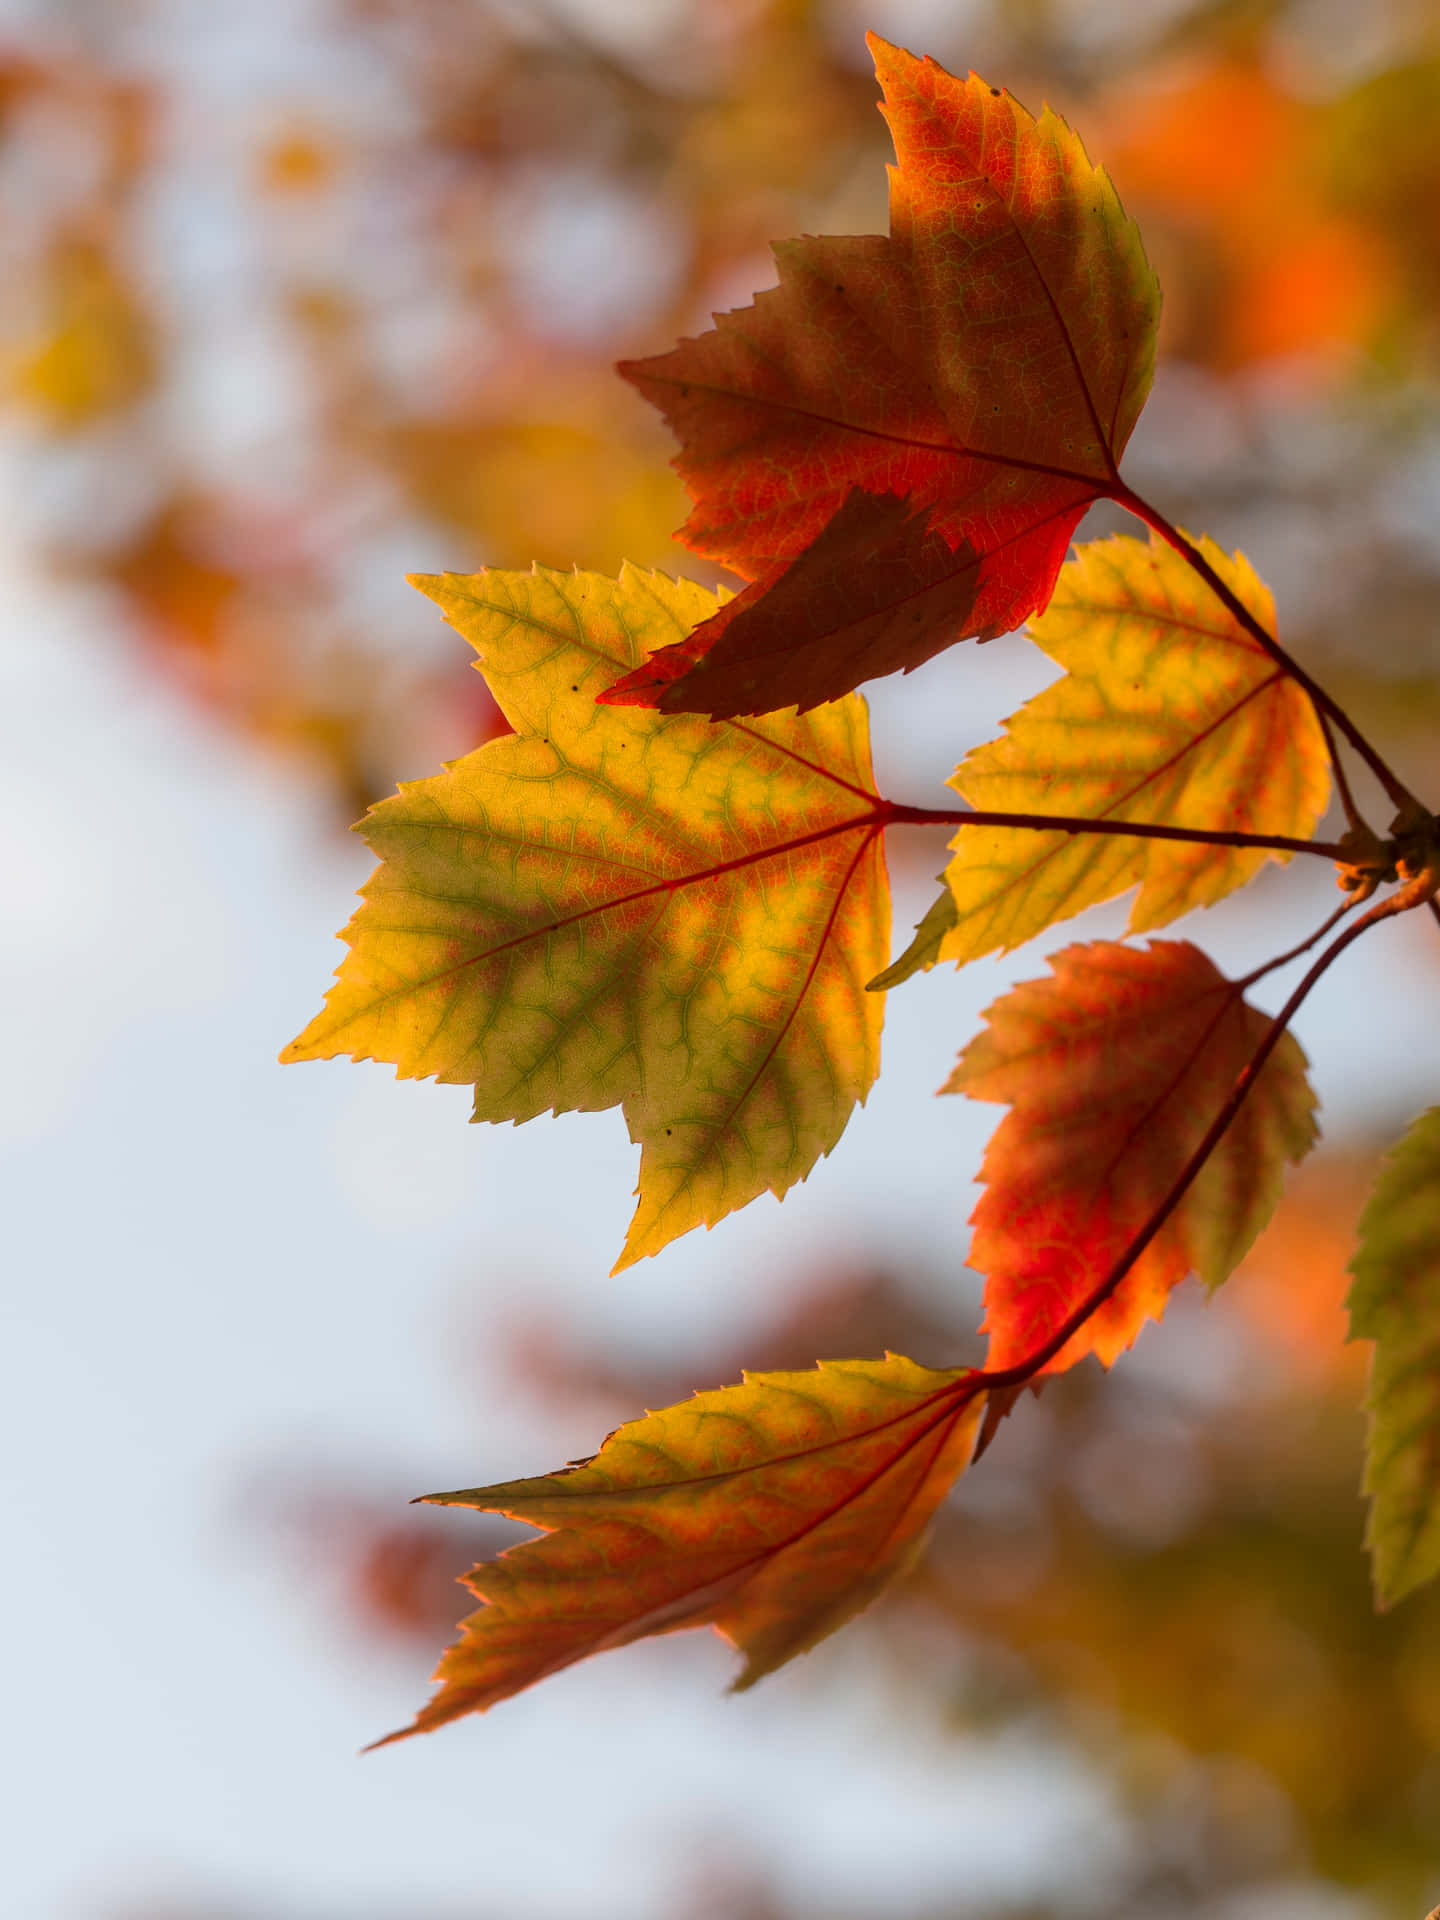 Embrace the changing seasons with this picturesque Fall Leaf background